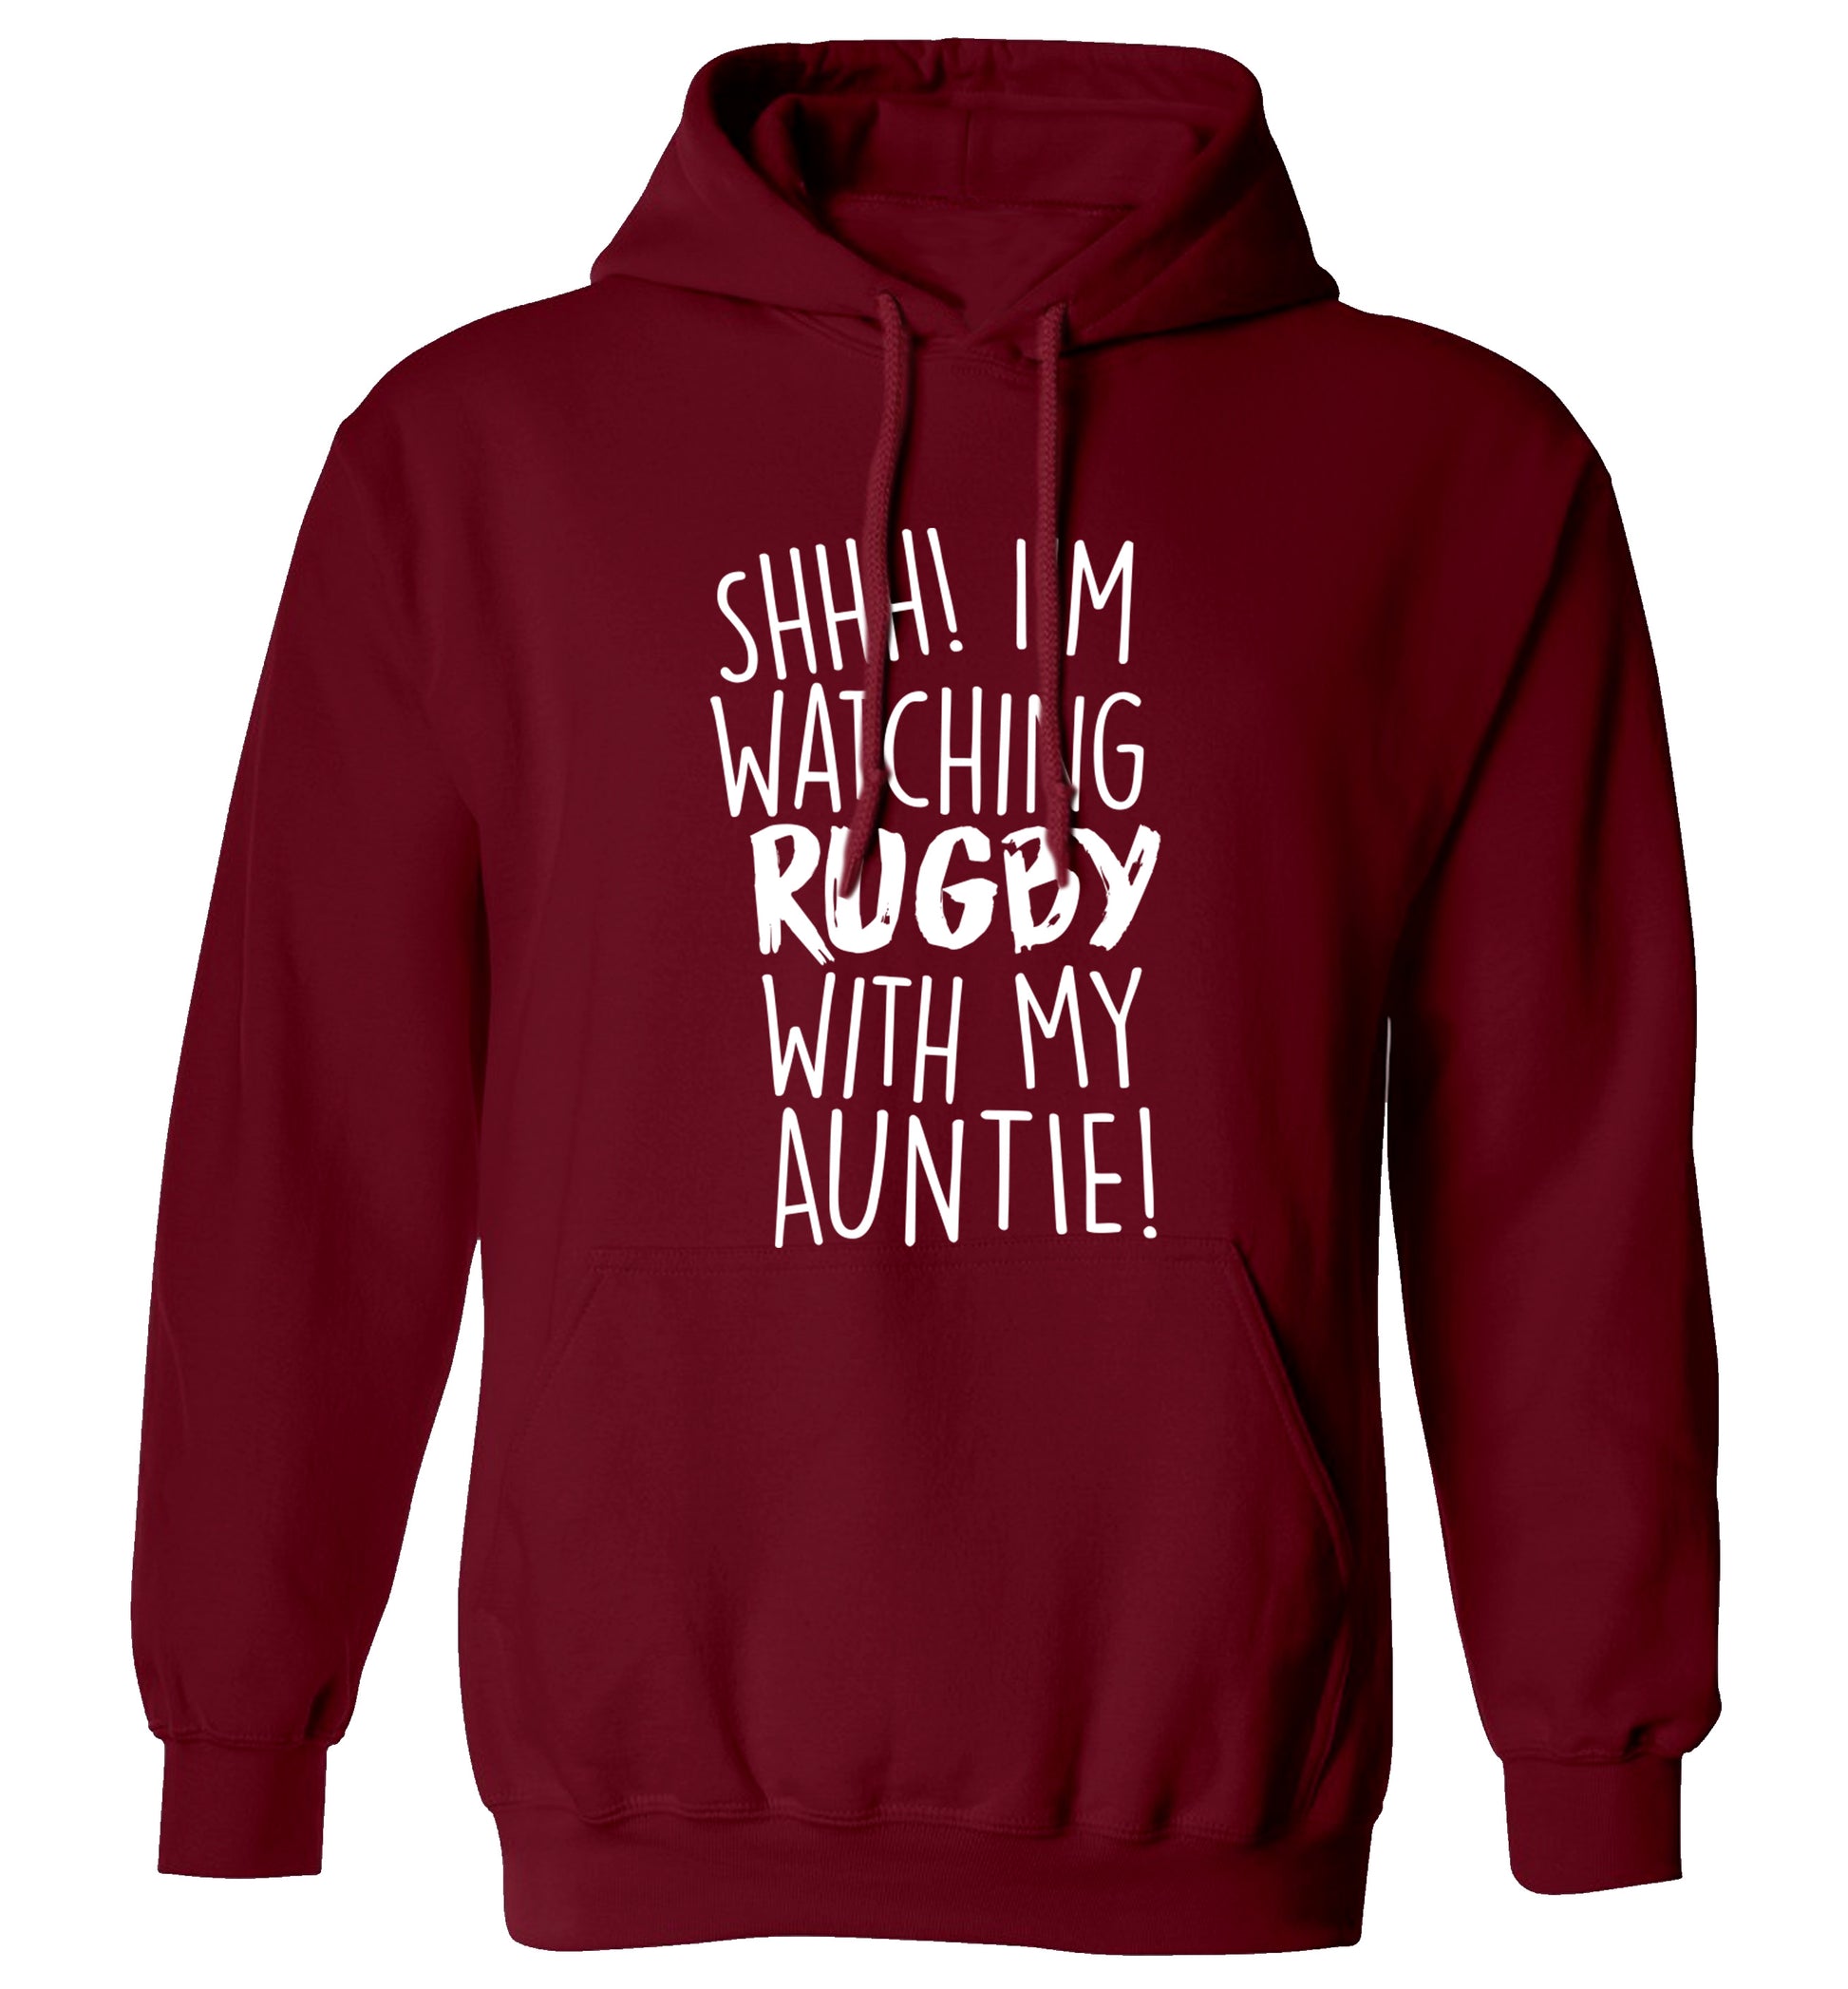 Shhh I'm watchin rugby with my auntie adults unisex maroon hoodie 2XL